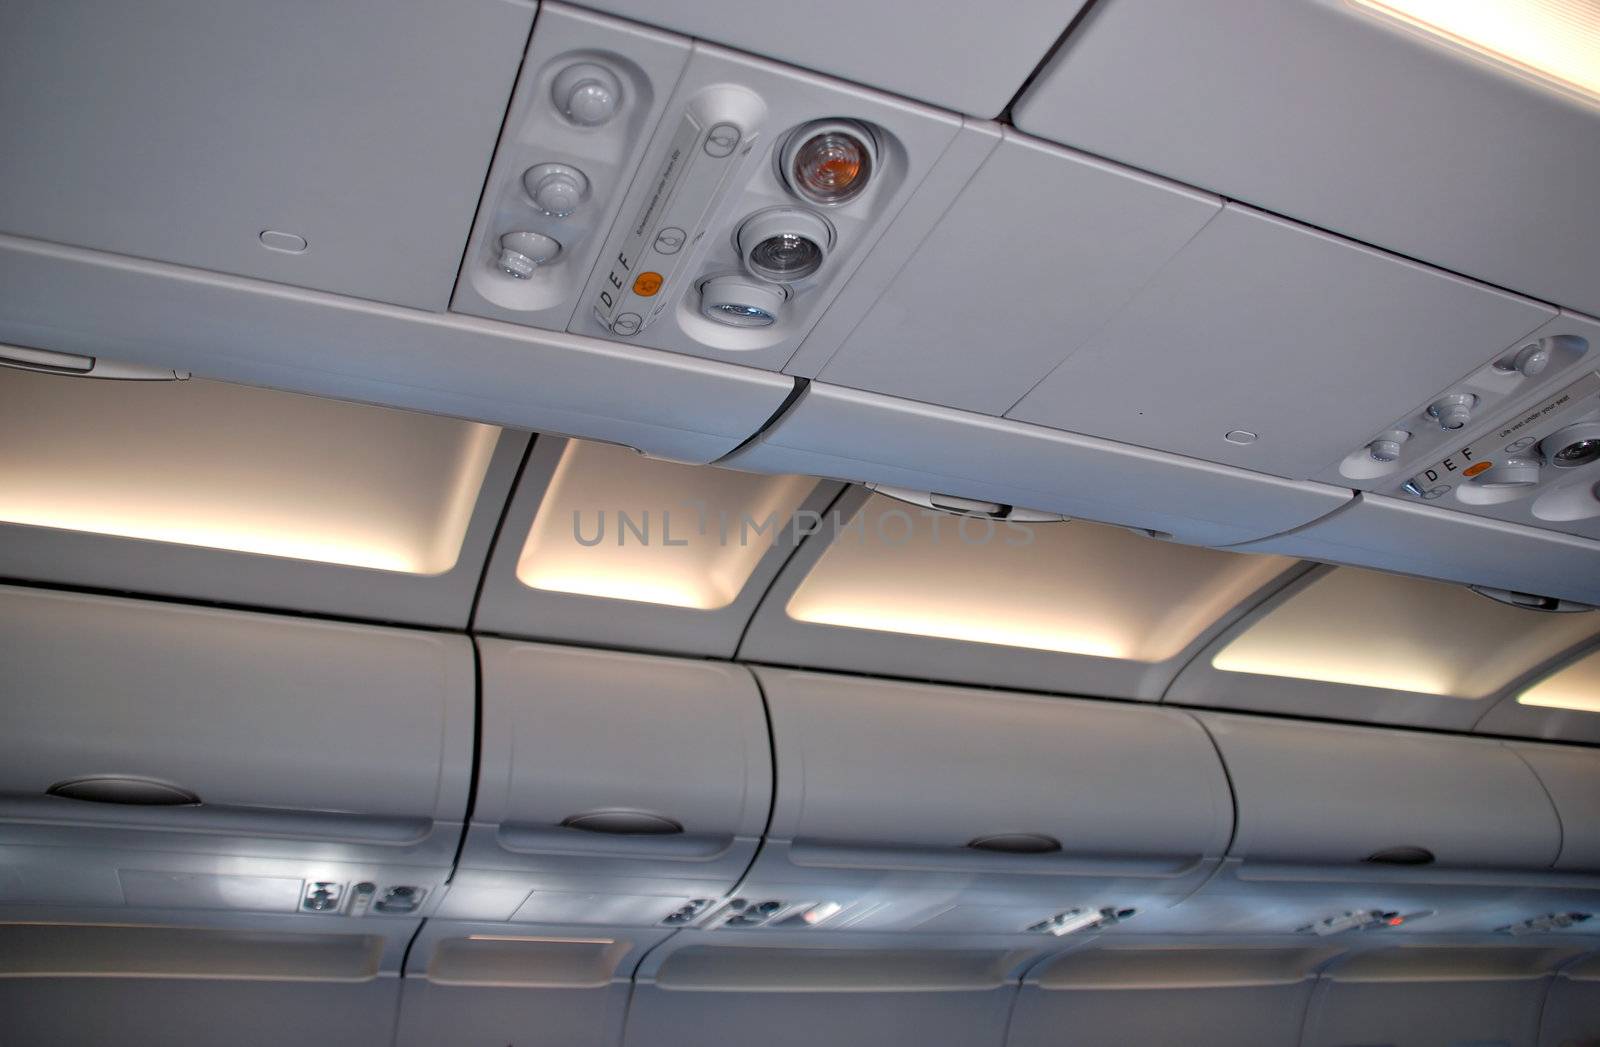 Cabin inside the aircraft, lights and signs